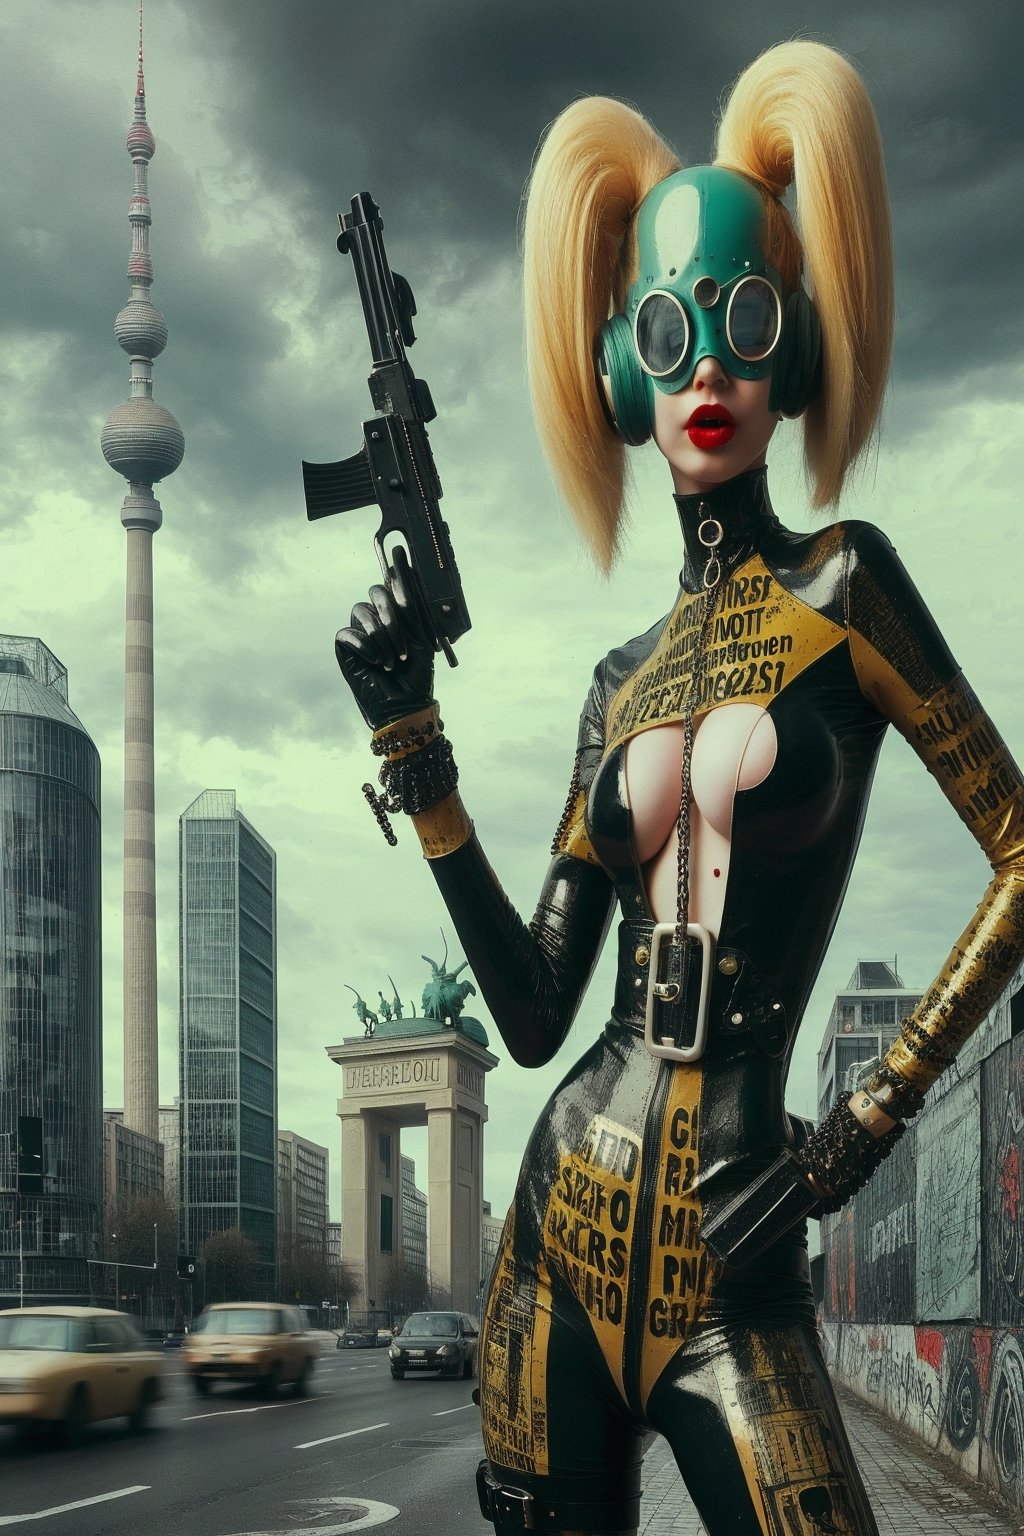 berlin megacity retro-futuristic  gangster ,she is wearing bizarre obscure wholebodyrubbersuitwithaccessories  fashion photo shoot